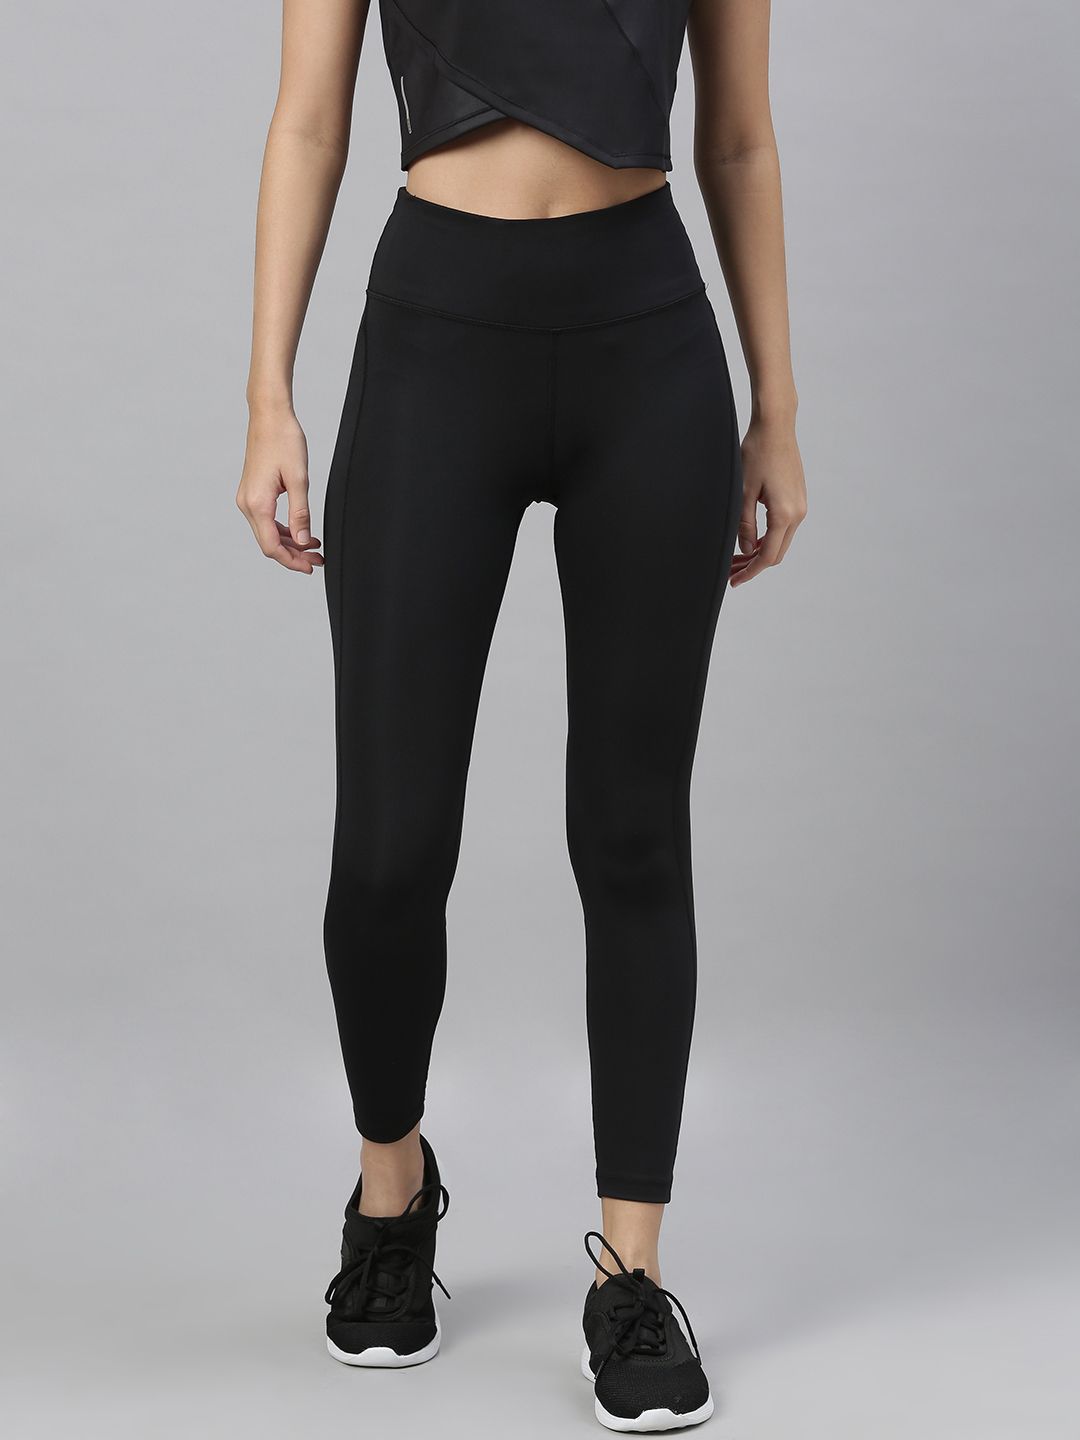 Nike Women Black Solid Epic Fast Running Tights Price in India